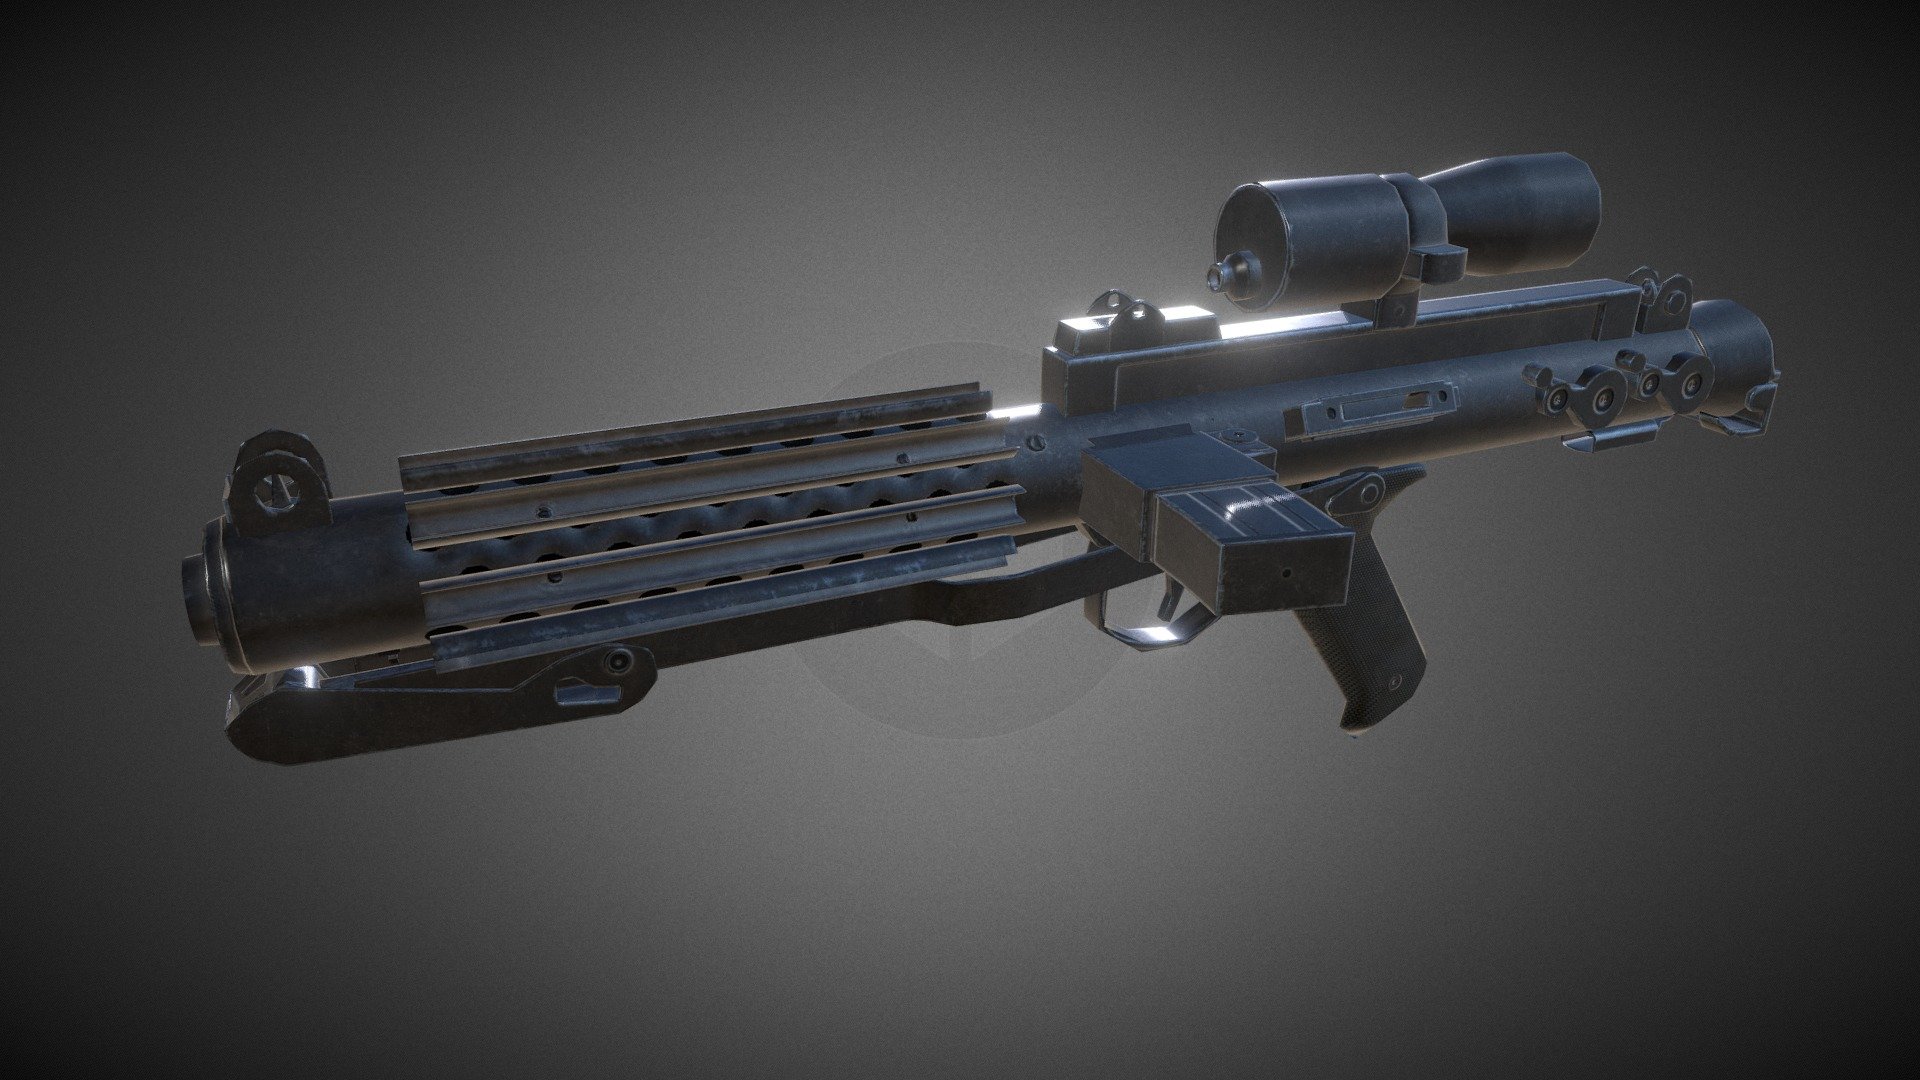 E-11, the most common and best known Star Wars Blaster!

4K textures (might take a while to load). I'm re-working the E-11 model I've done a few months ago, going a bit lower poly where I can, retexturing it from scratch, adding some bolts etc. There were no issues reported for being too high in vert count but helping the computer process models a bit easier is worth the trouble. For Star Wars Jedi Knight Academy!

WeaponsHD Project - E-11 Revamp 4K textures - Buy Royalty Free 3D model by Rooxon 3d model